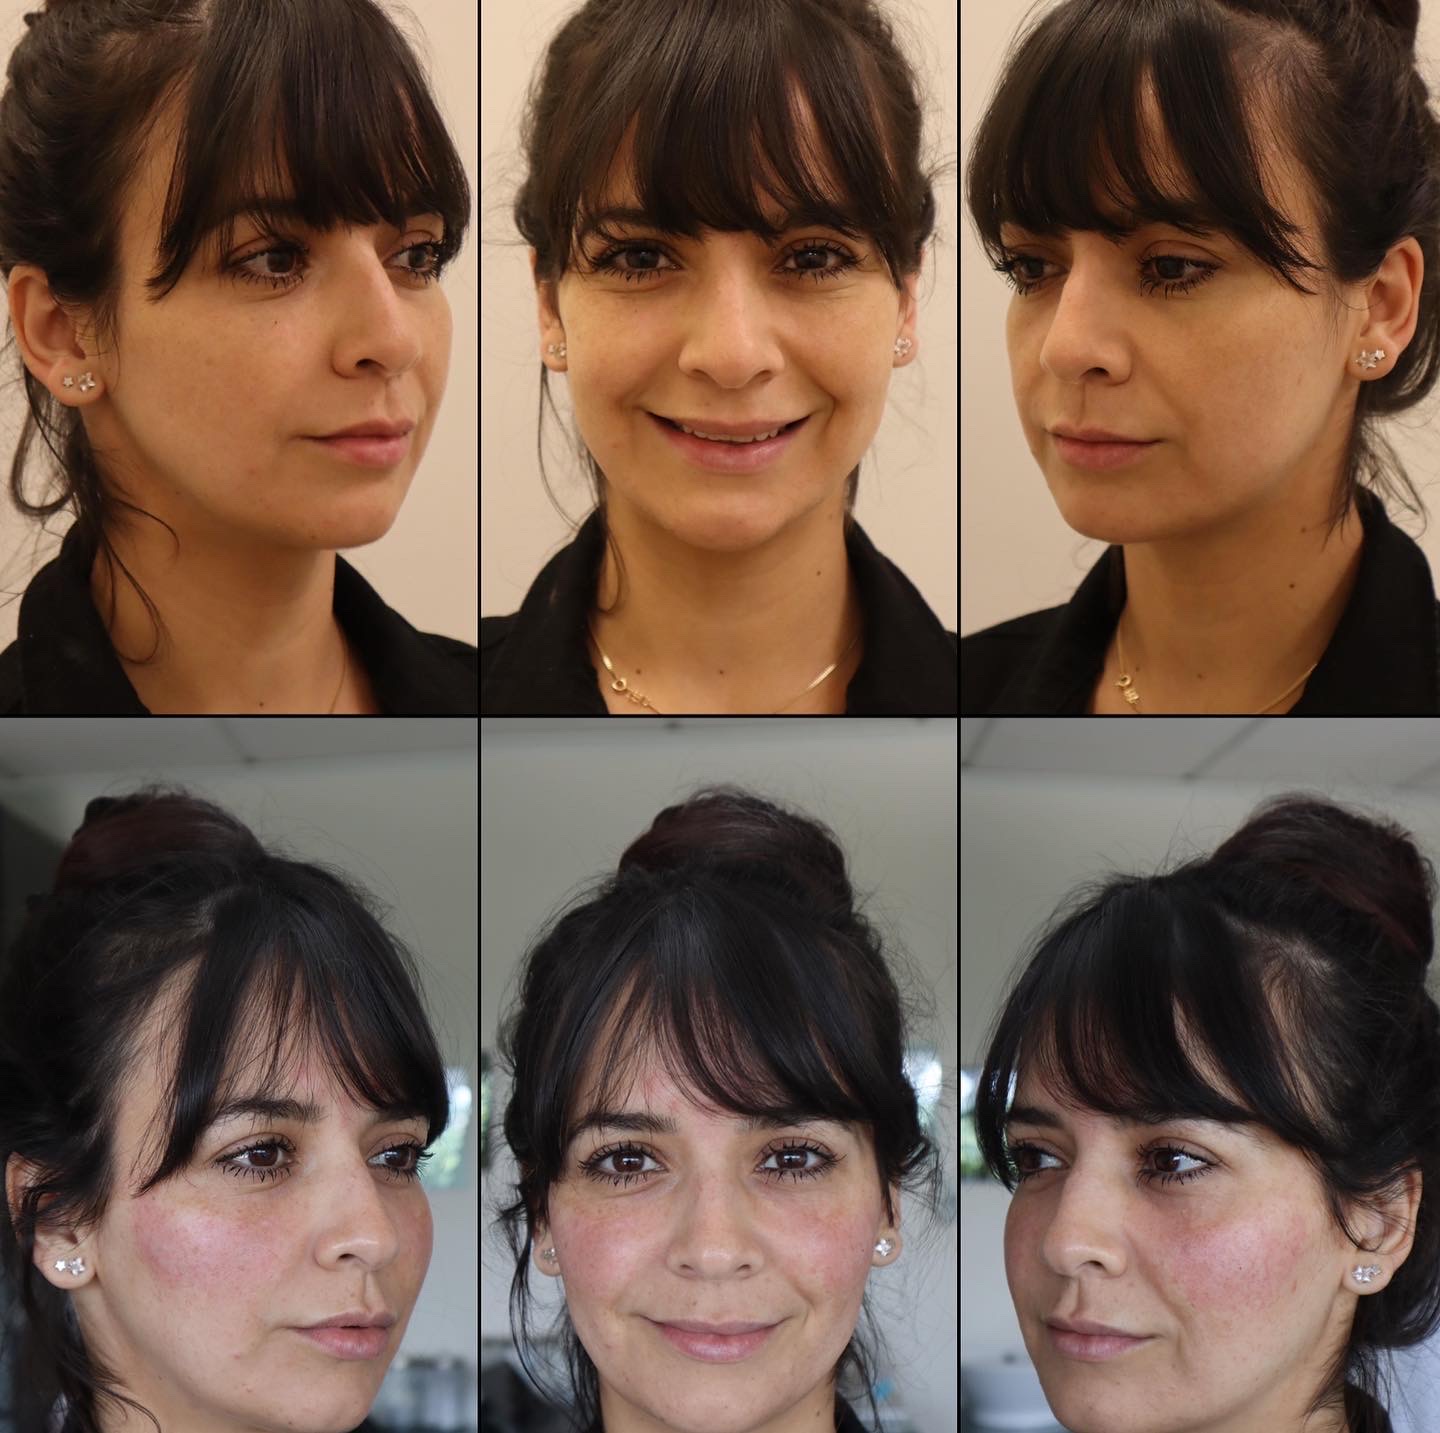 36 year-old female before and after cheek filler (Web ID #1341)2